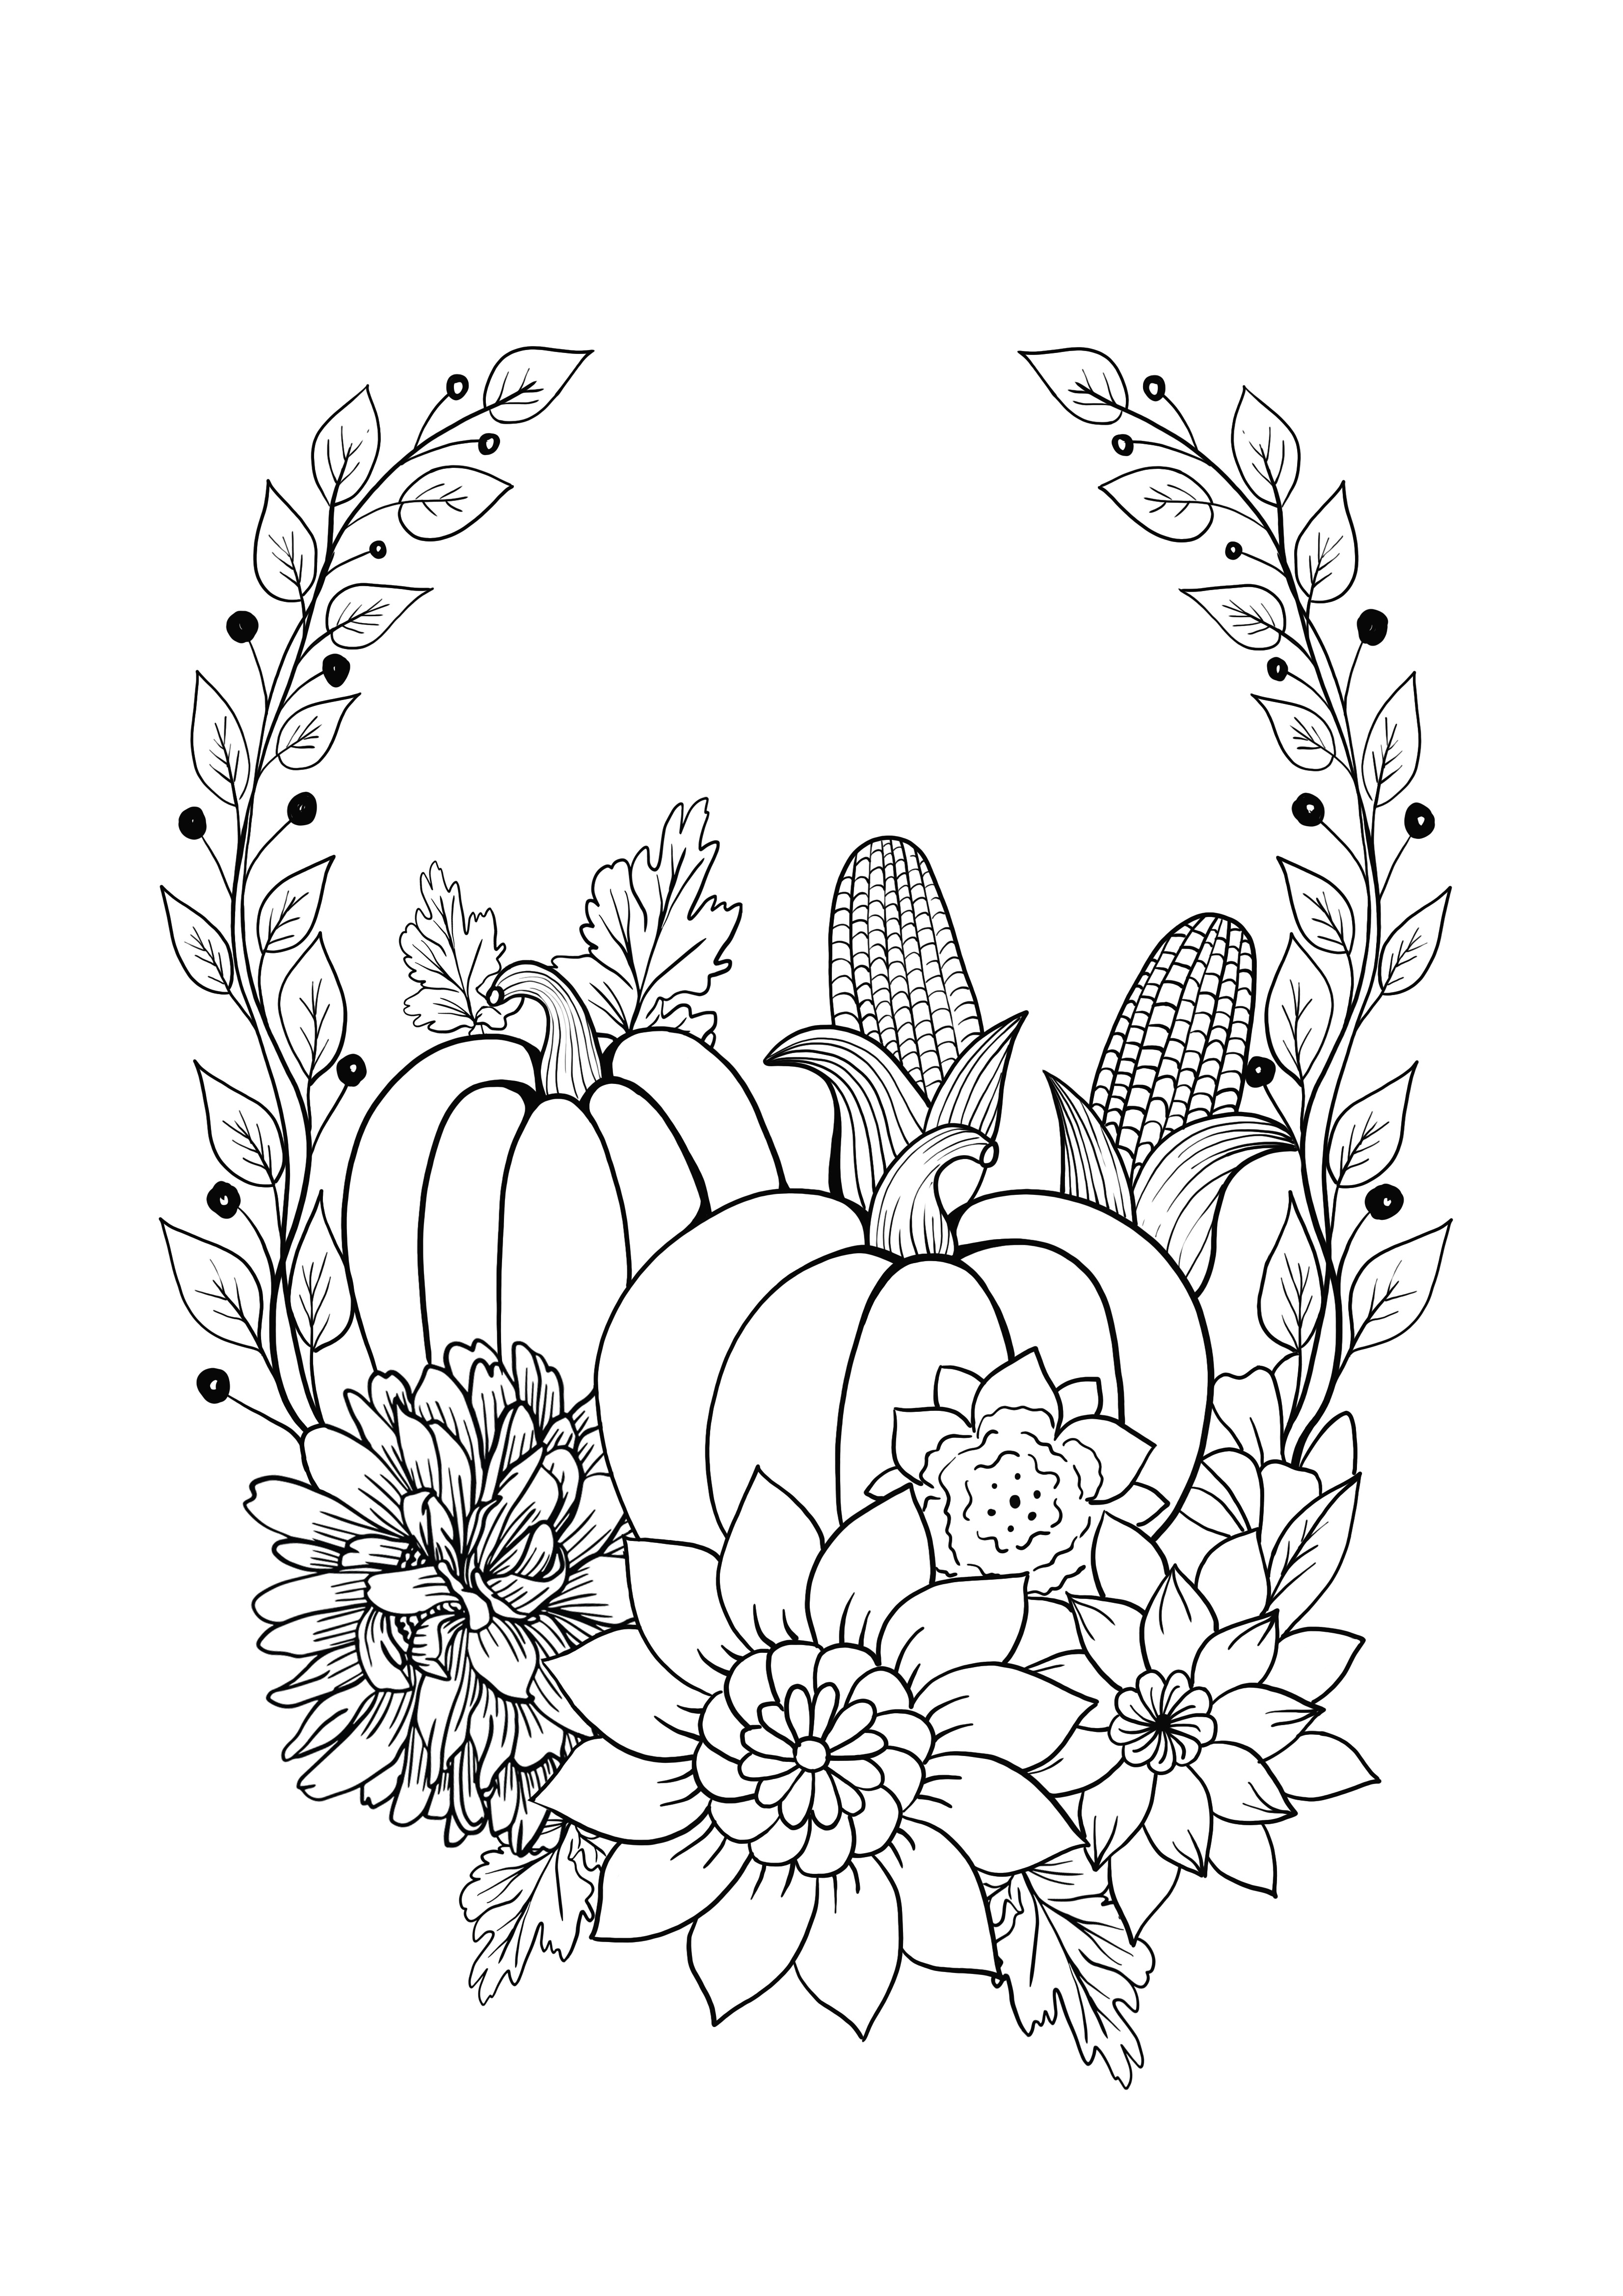 beautiful autumn fruit and flower composition free coloring and easy printing